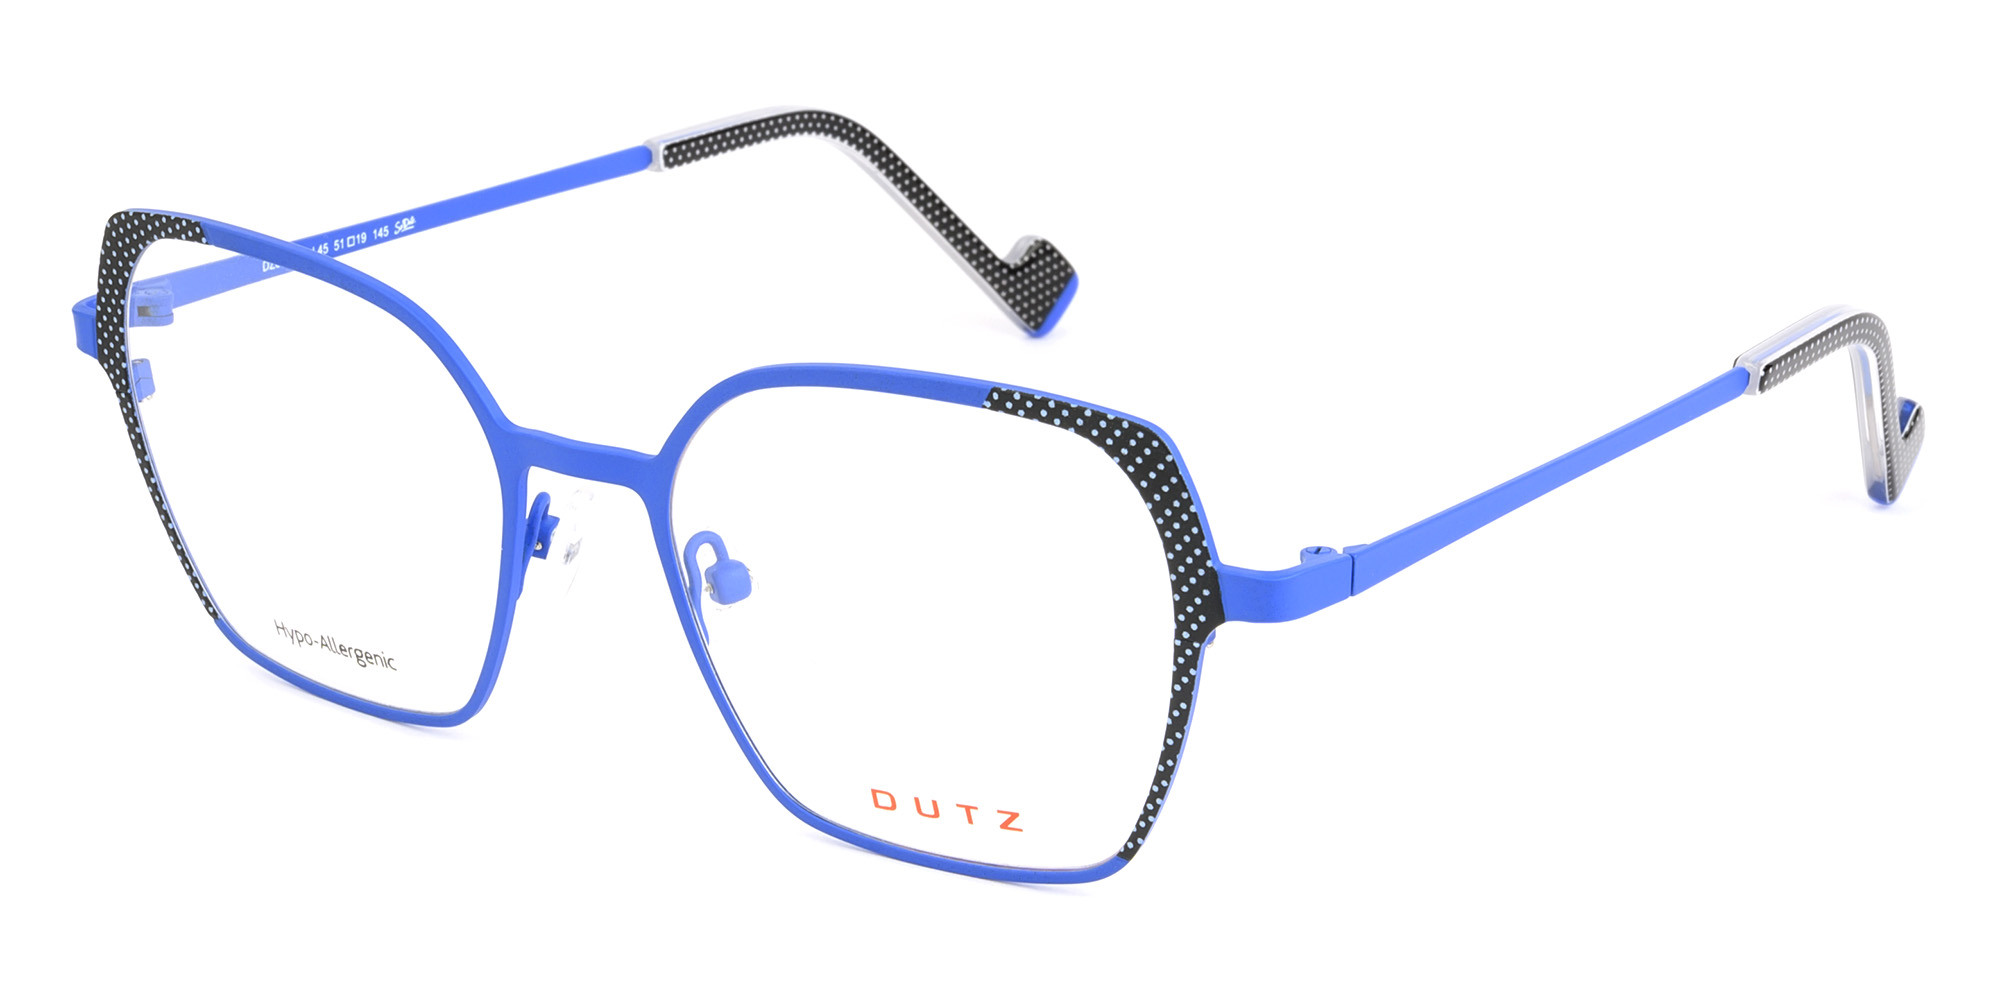 Lady's, blue based, metallic frame and temples, enhanced by a black & white dot pattern on the front and on the acetate tips